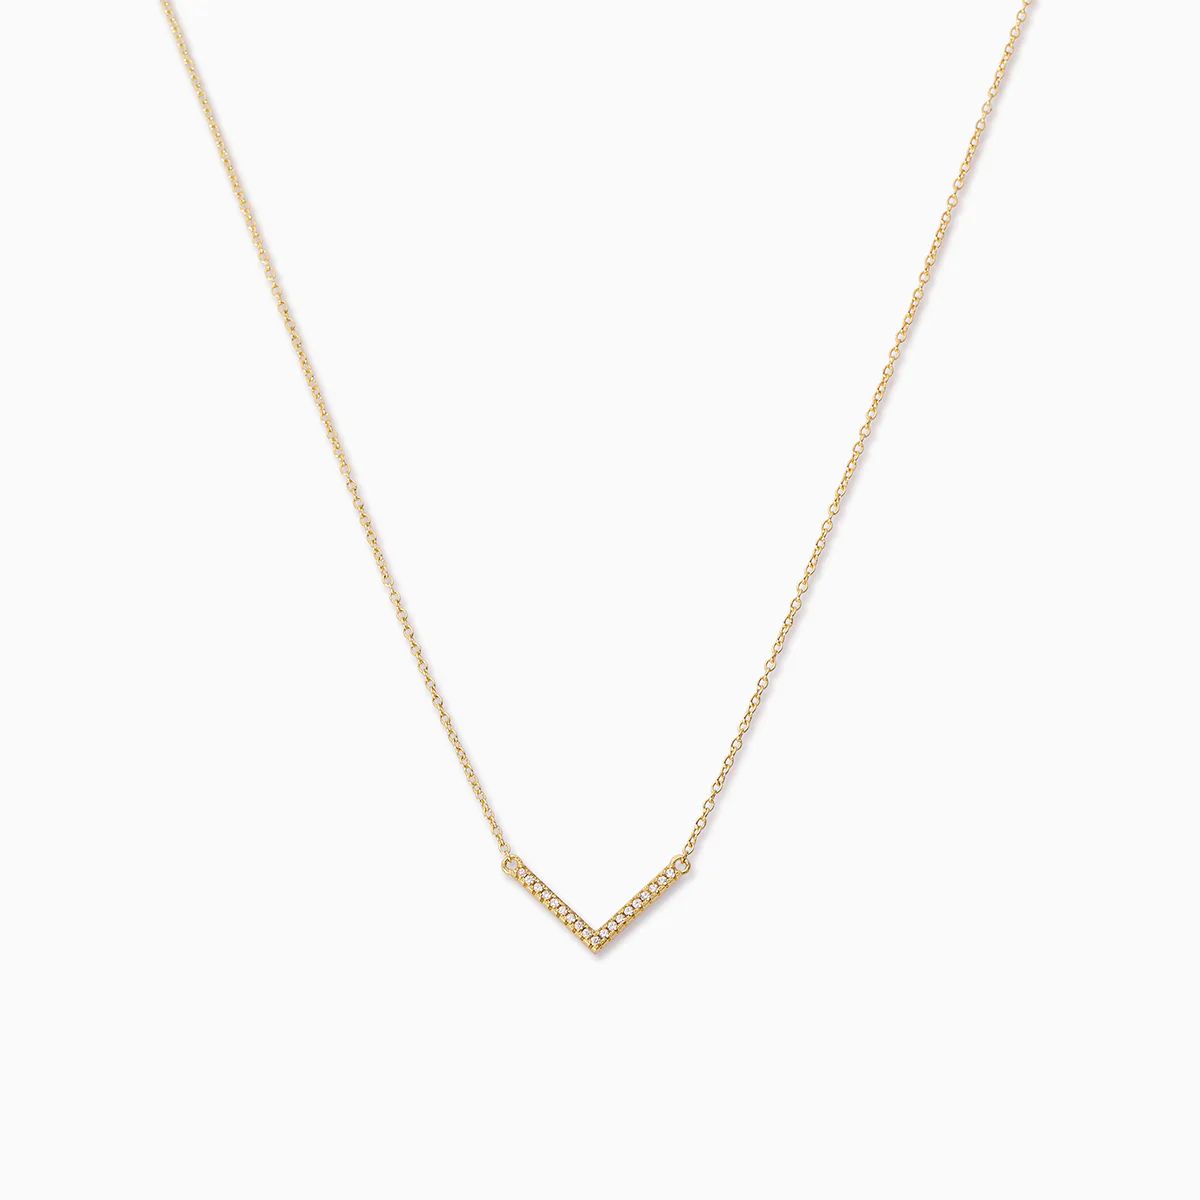 Studded Baby V Necklace | Uncommon James